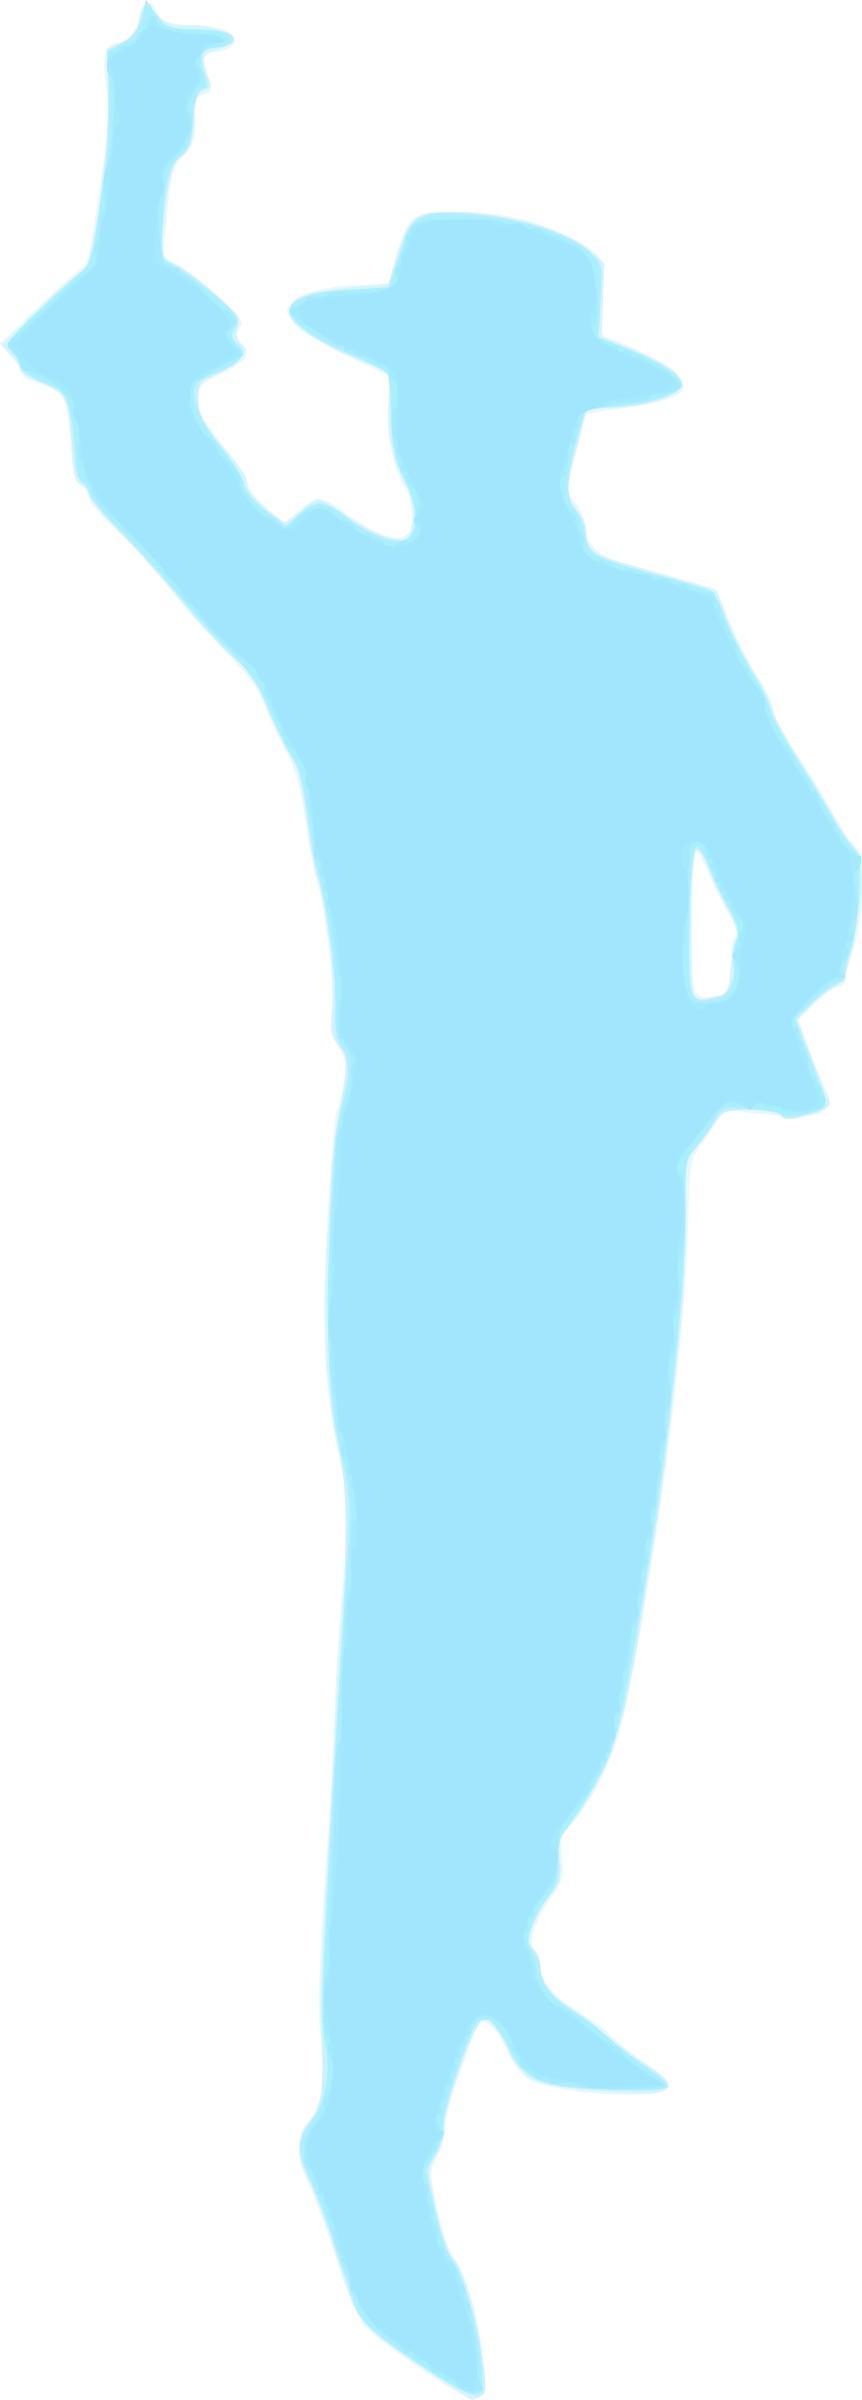 Silhouette Homme 02 png transparent